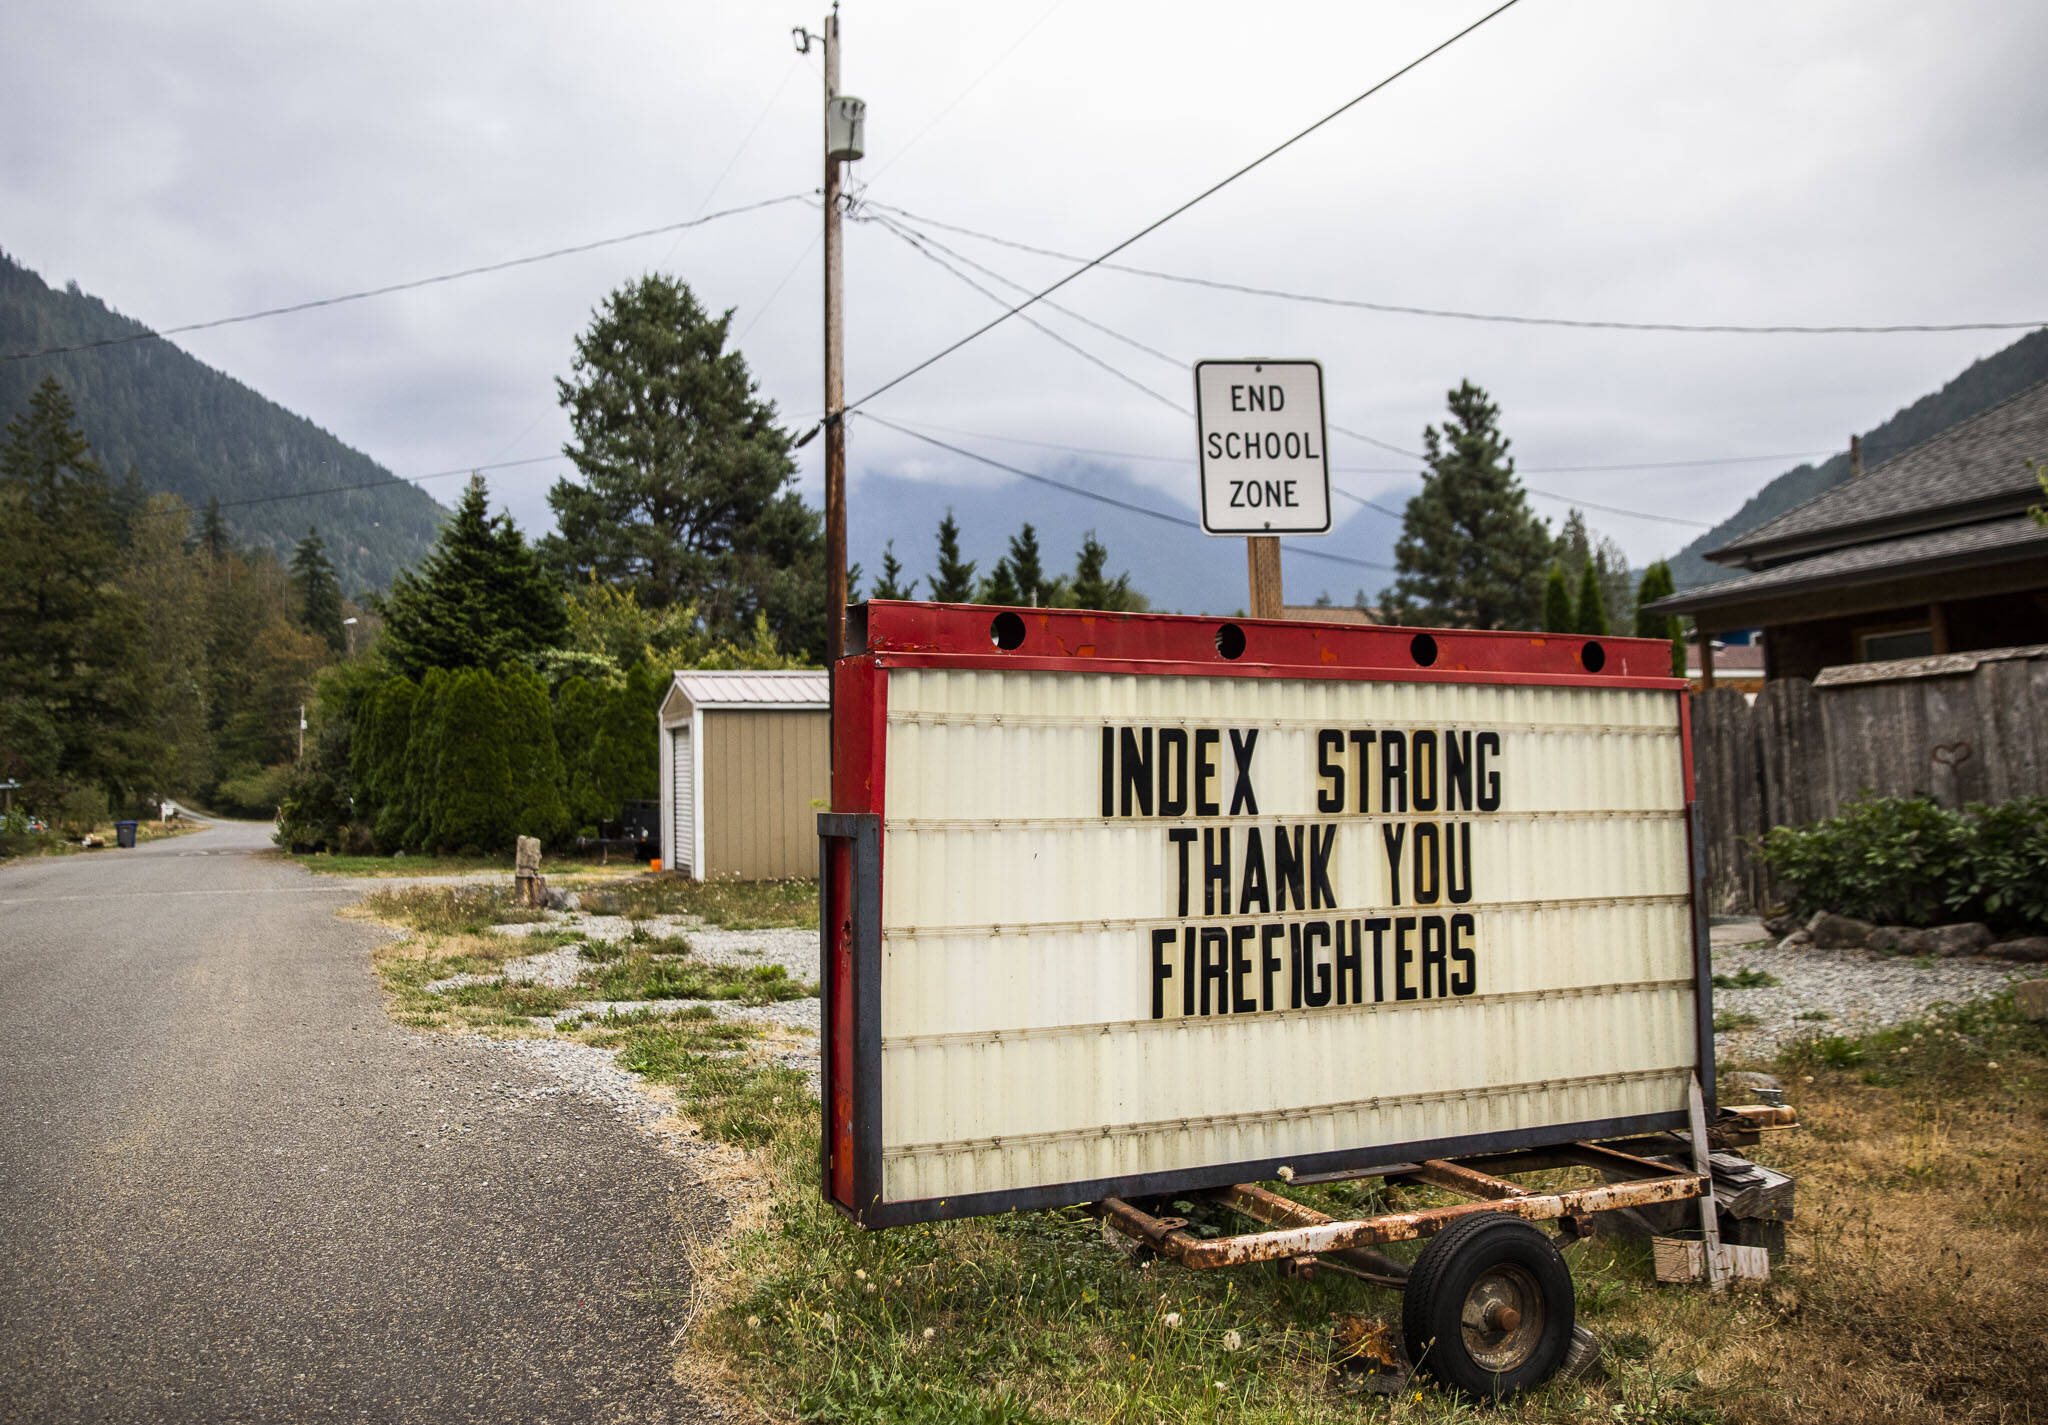 A sign thanking firefighters is displayed along an empty Index Avenue on Tuesday, Sept. 13, 2022 in Index, Washington. (Olivia Vanni / The Herald)